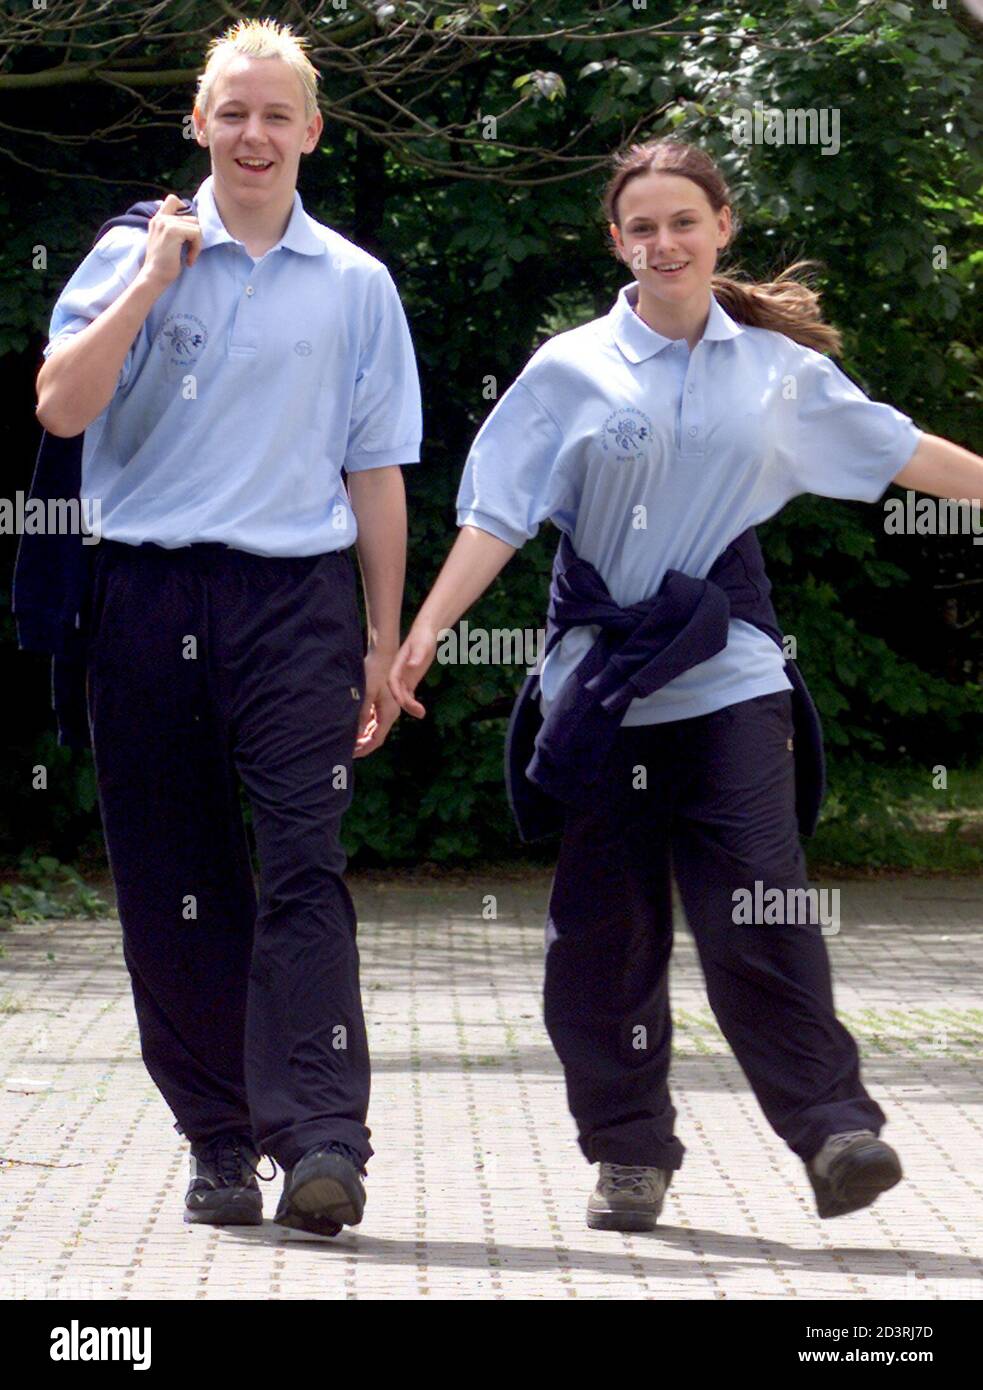 Fourteen-year-old Andy Benn (L) and 15-year-old Linda Rahl (R) pose wearing their brand new school uniform, which is being piloted at the Willi-Graf-Oberschule in Berlin May 21, 2001. The uniform trial starts today in two classes of this school and runs until the beginning of the summer holidays. Pupils at German state schools do not wear uniforms.  AX/JOH Stock Photo